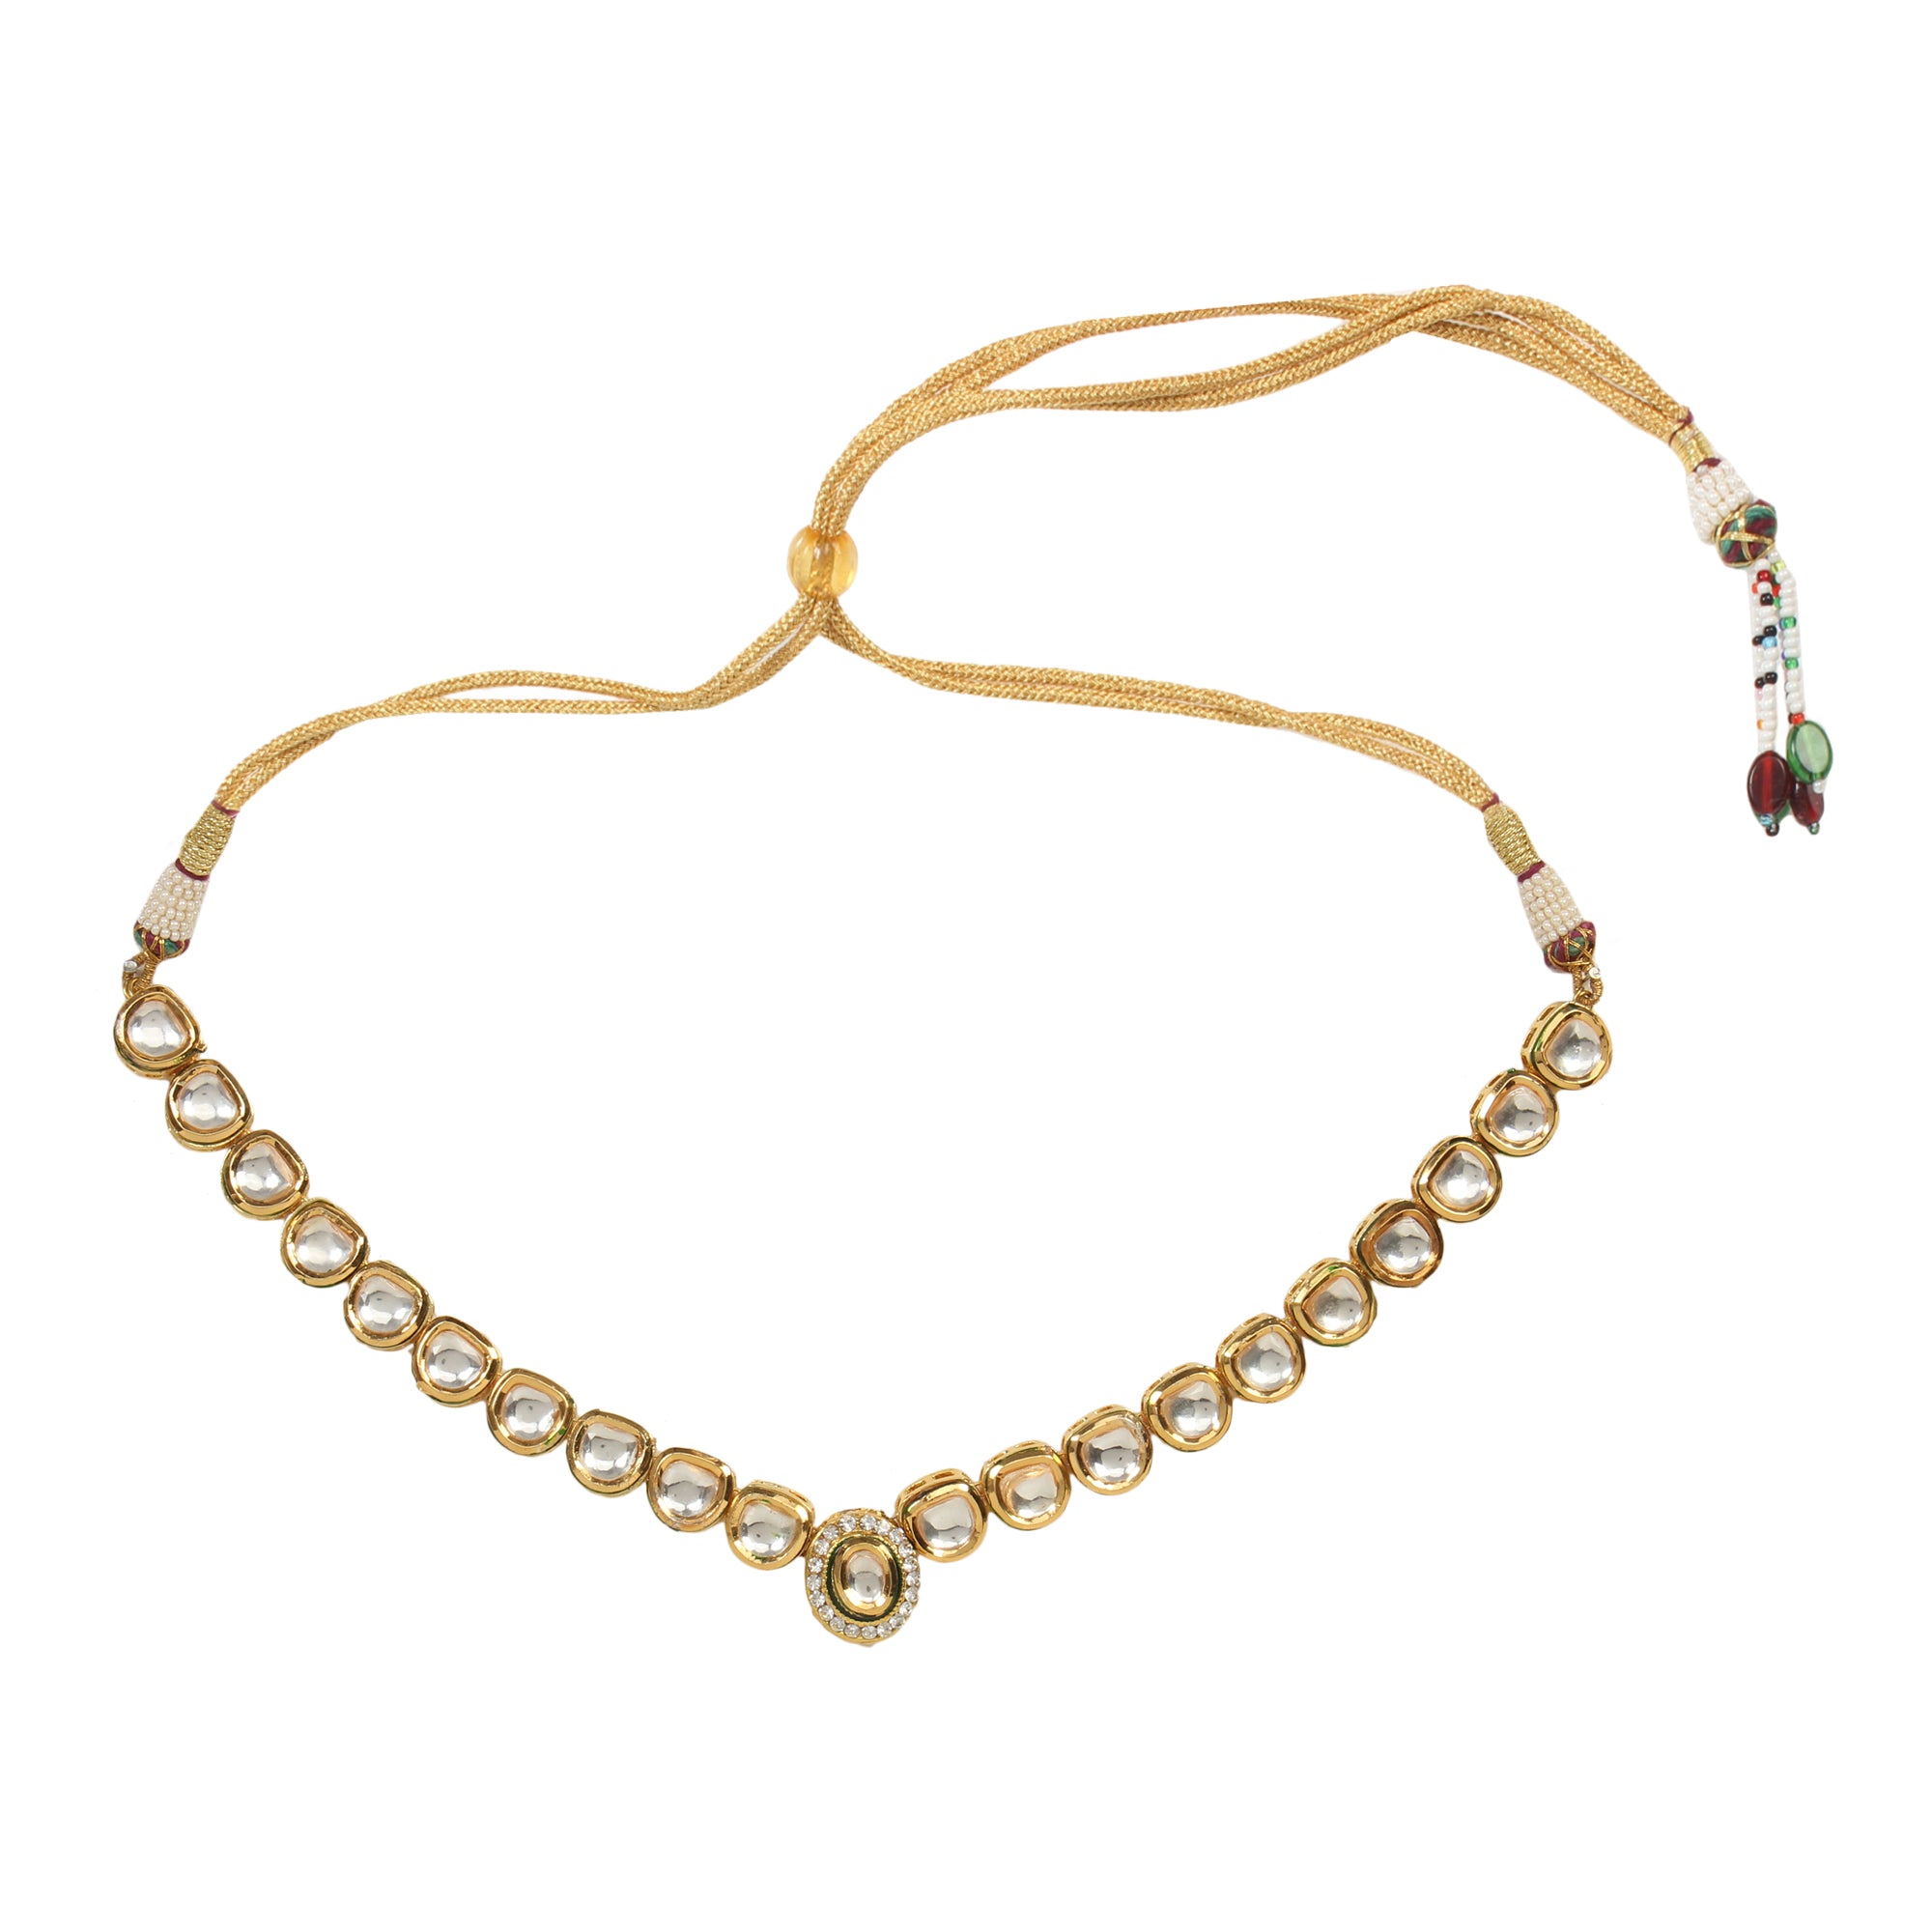 Women's Handcrafted Kundan studded necklace with earring - Femizen